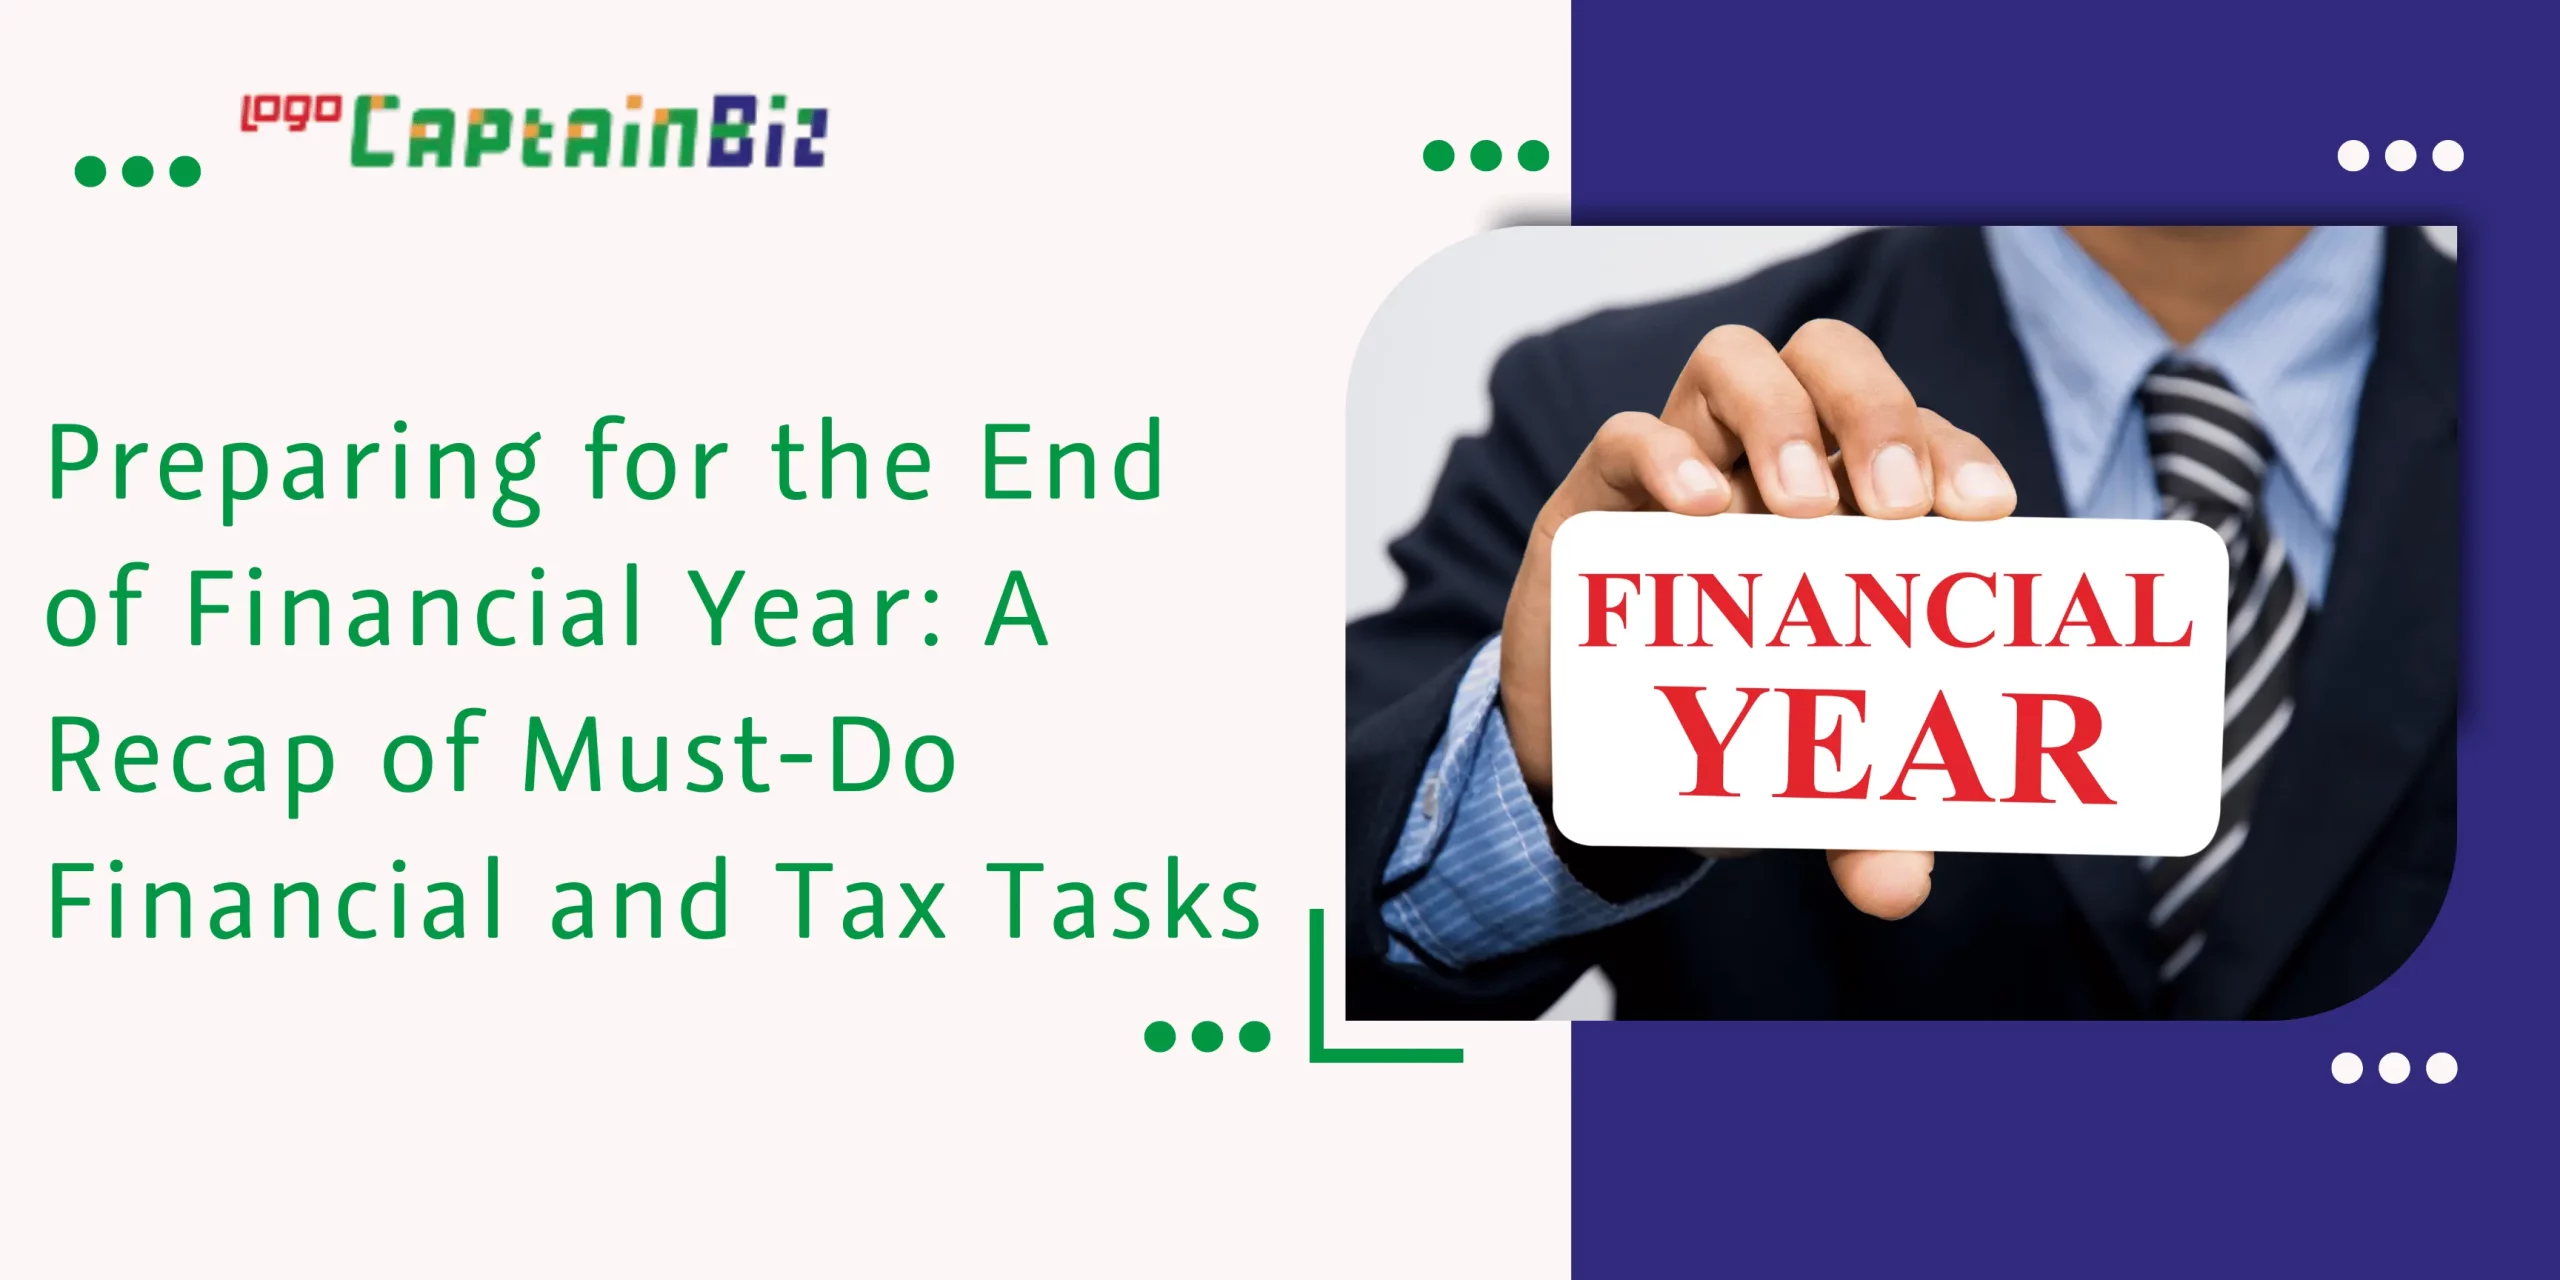 CaptainBiz: preparing for the end of financial year: a recap of must-do financial and tax tasks